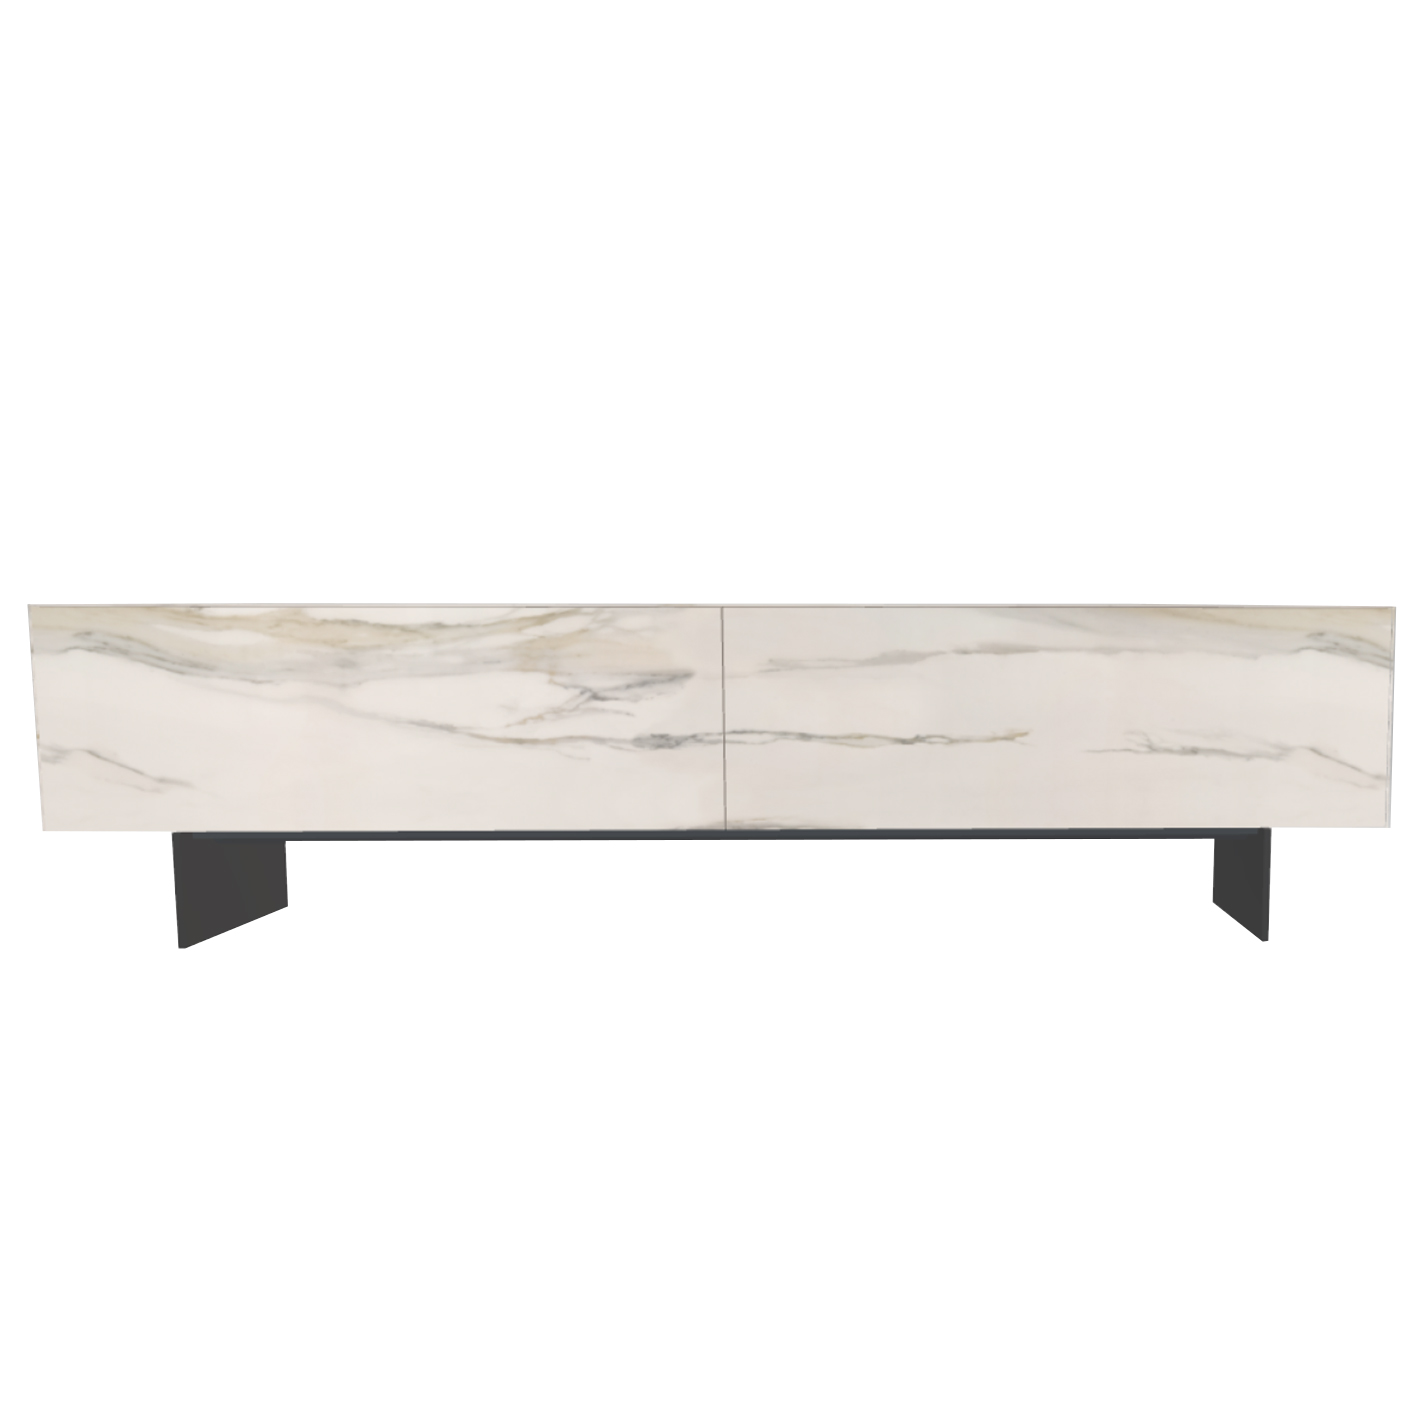 Lago xGlass - MATERIA 1049 XGLASS MARBLE OUTLET TV-Board - 1